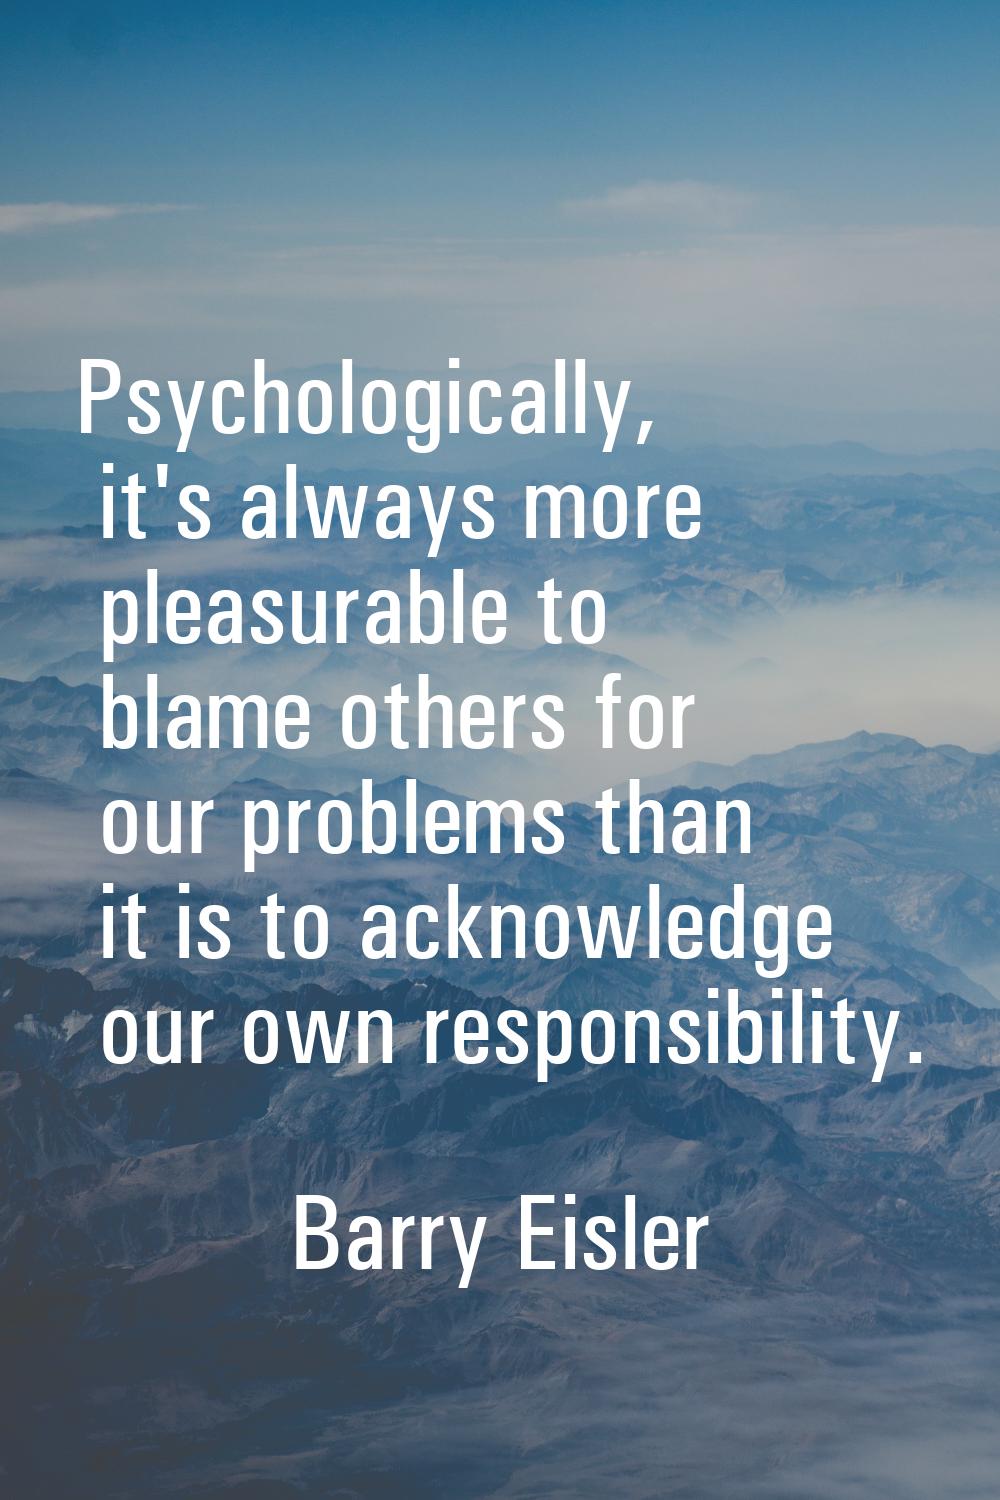 Psychologically, it's always more pleasurable to blame others for our problems than it is to acknow